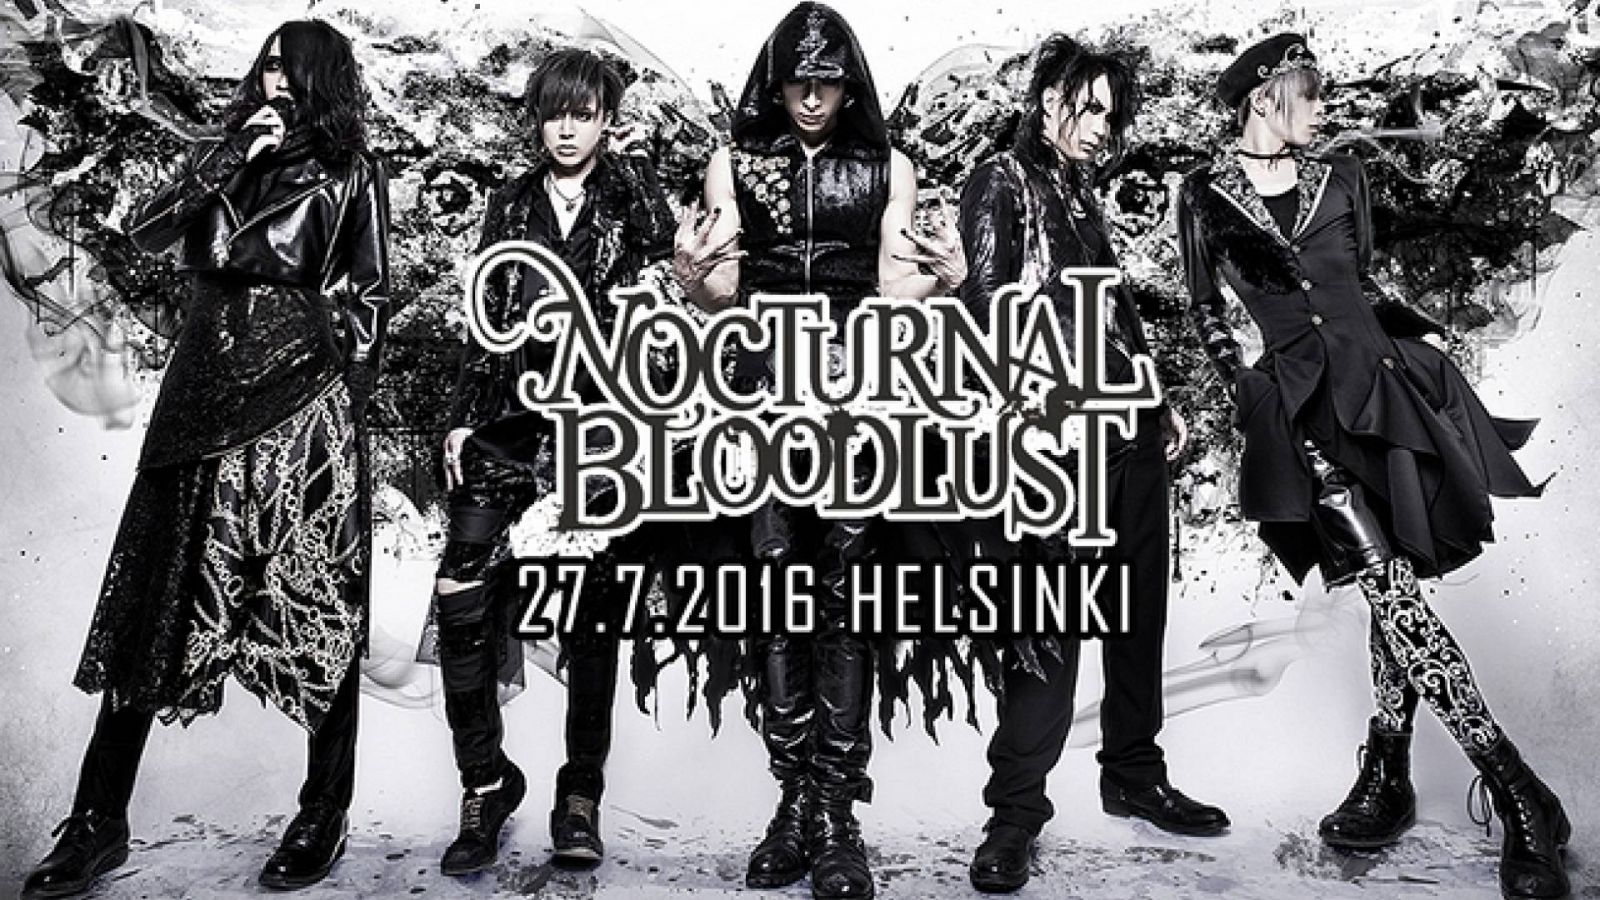 NOCTURNAL BLOODLUSTin kiertue huipentuu Suomeen © NOCTURNAL BLOODLUST. All Rights Reserved.